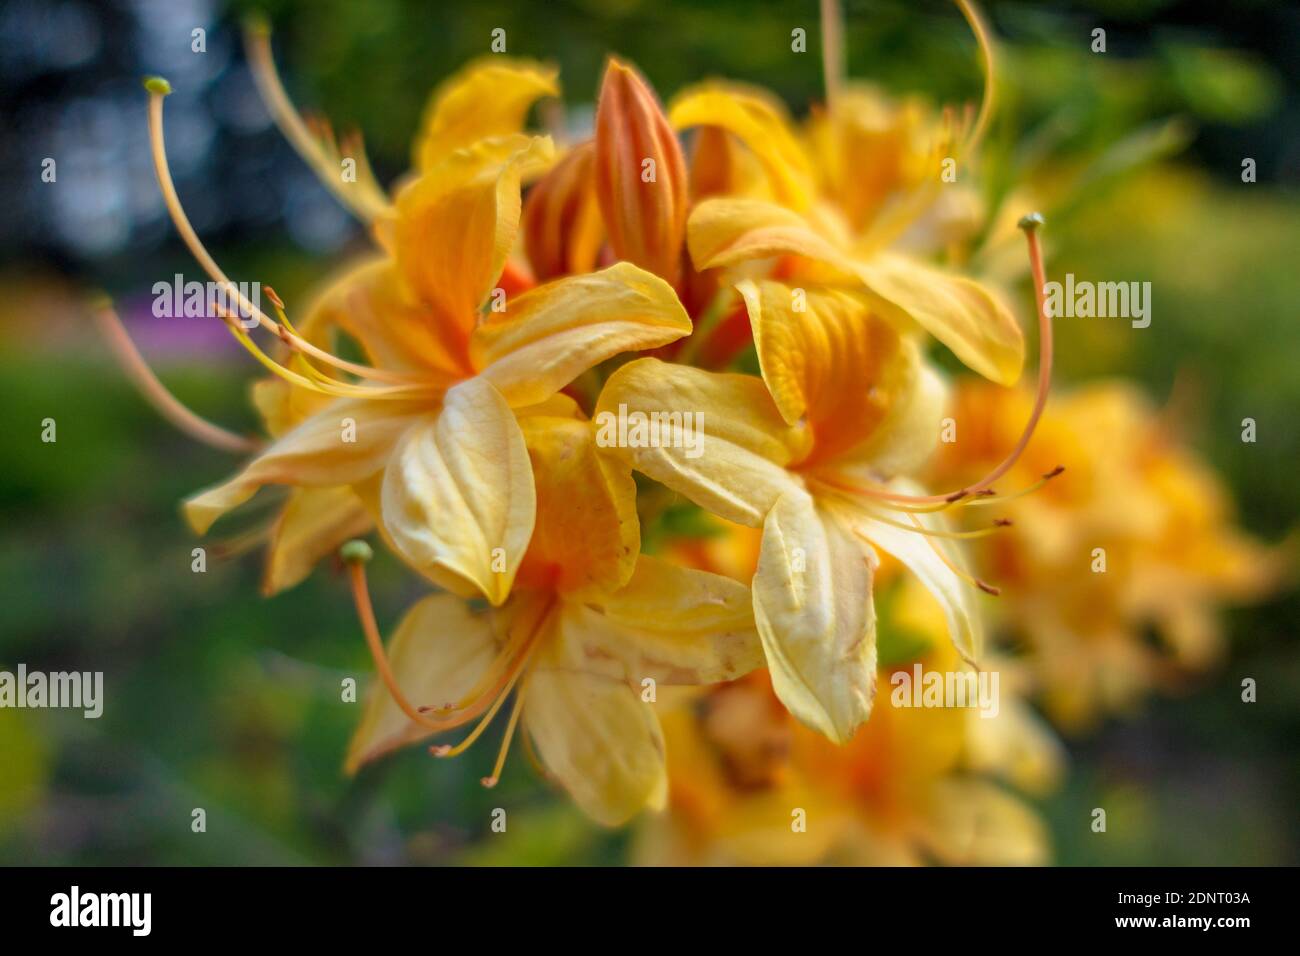 Bush with yellow-orange flowers. Rhododendron calendulaceum Torr. Stock Photo